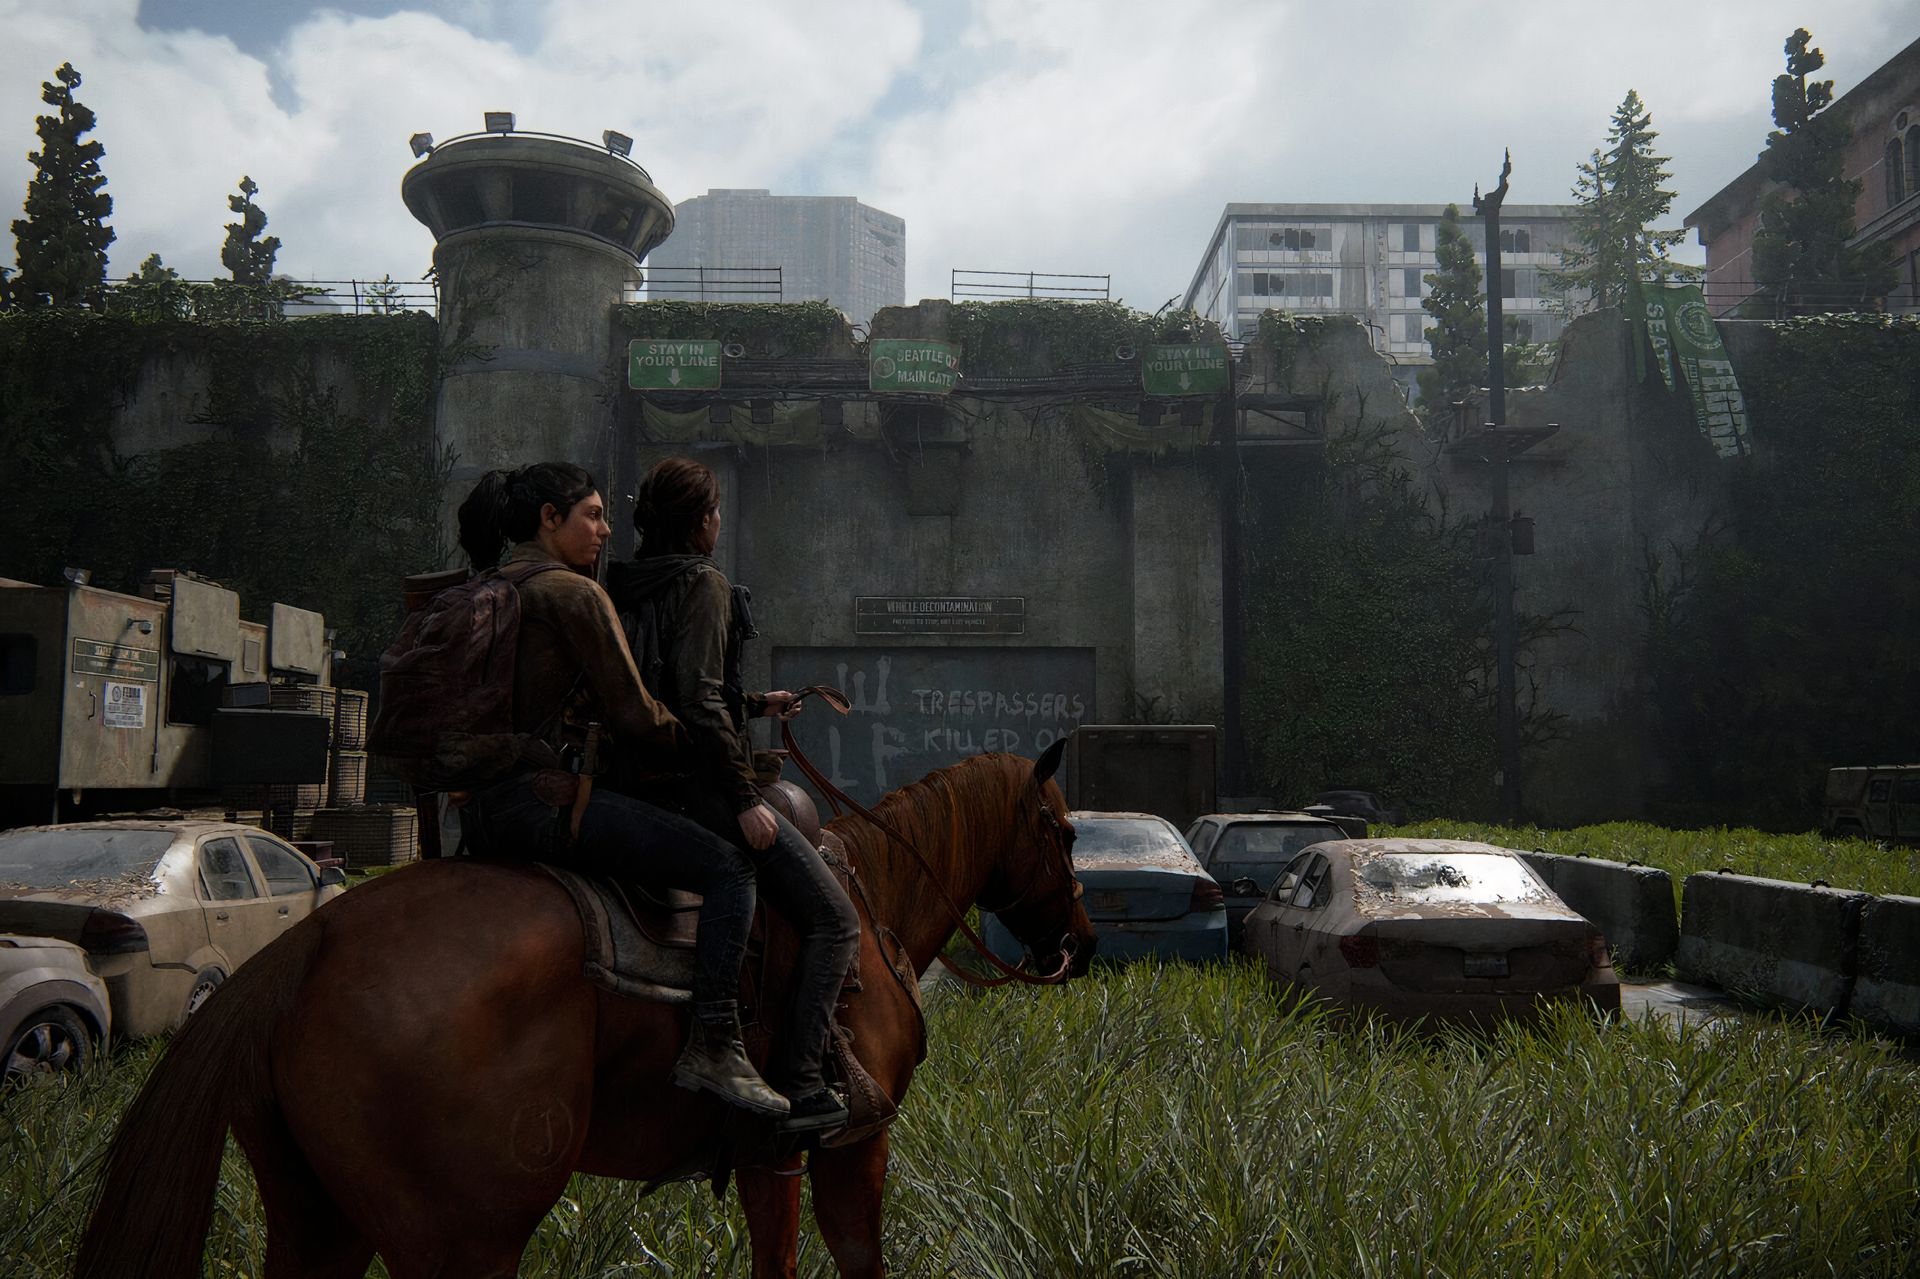 Is The Last of Us remake coming to PS4?